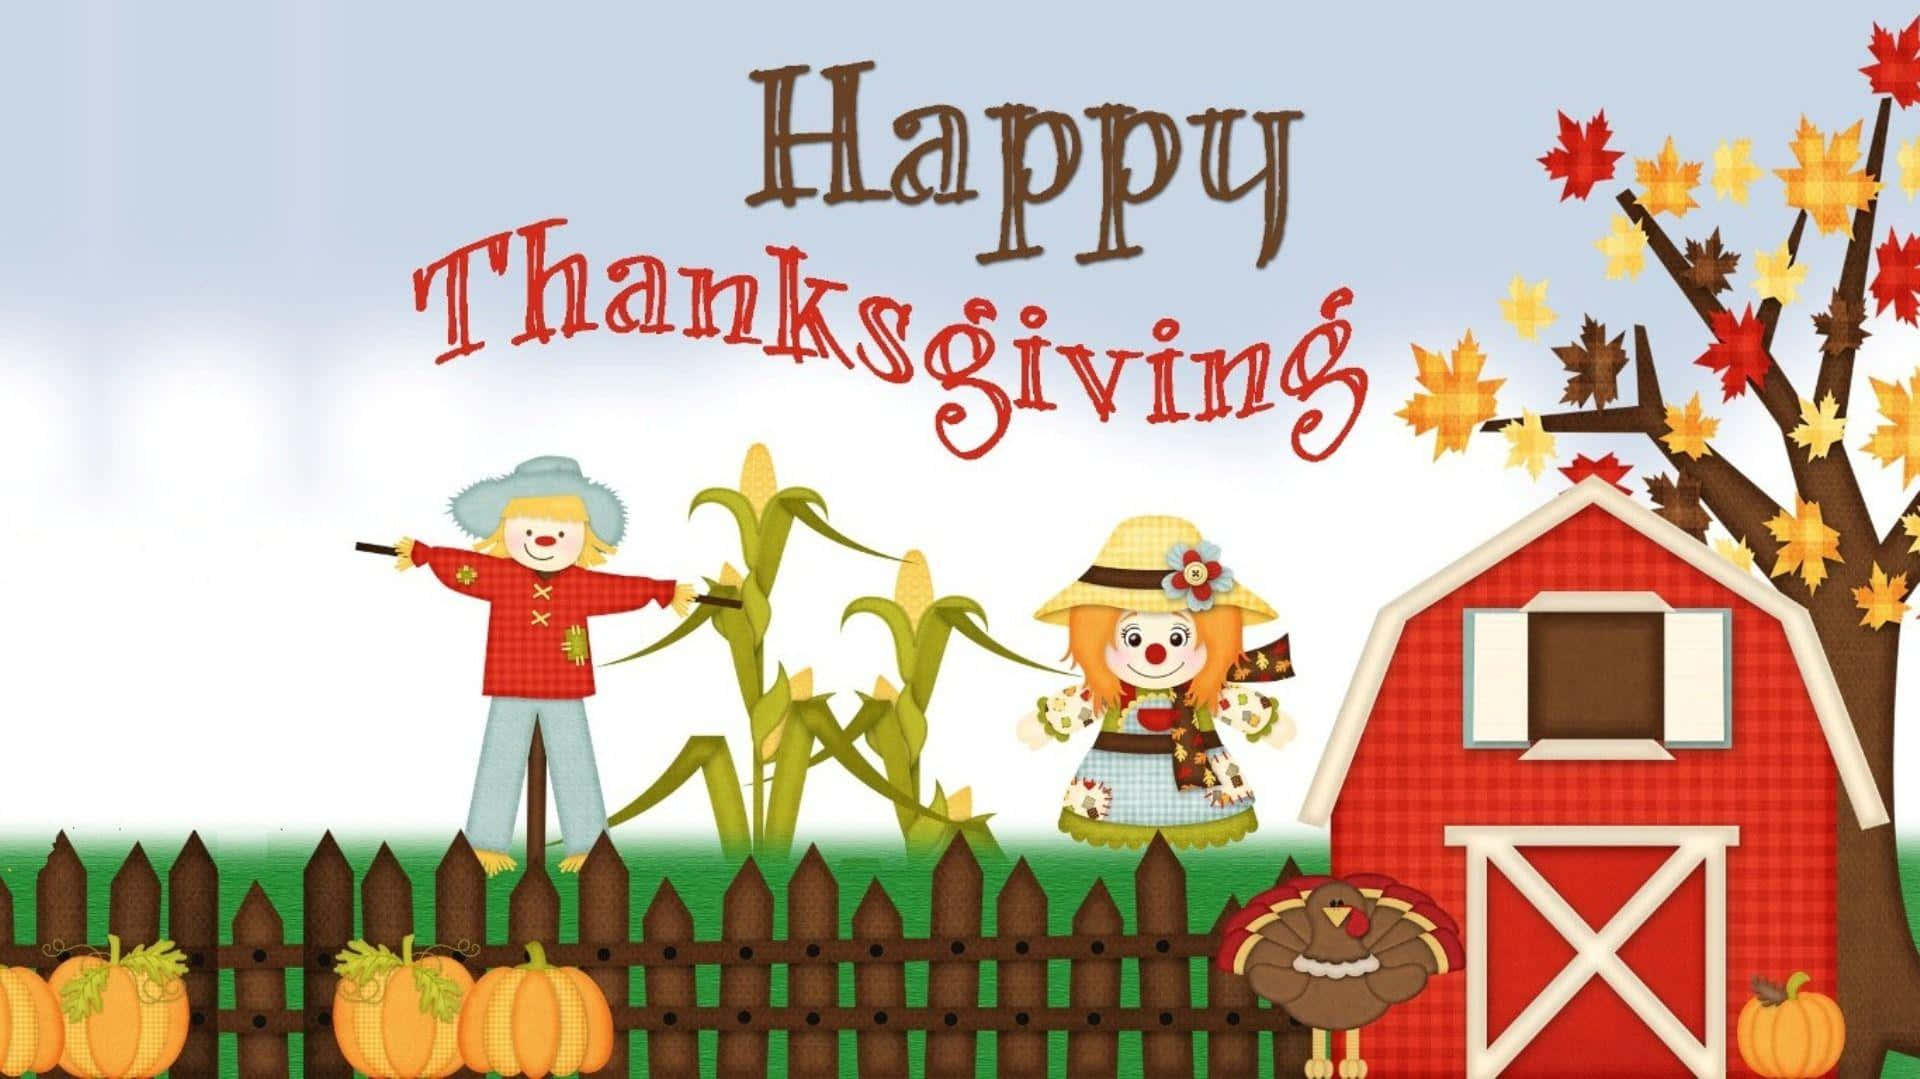 Cartoon Thanksgiving Greetings With Scarecrows Wallpaper